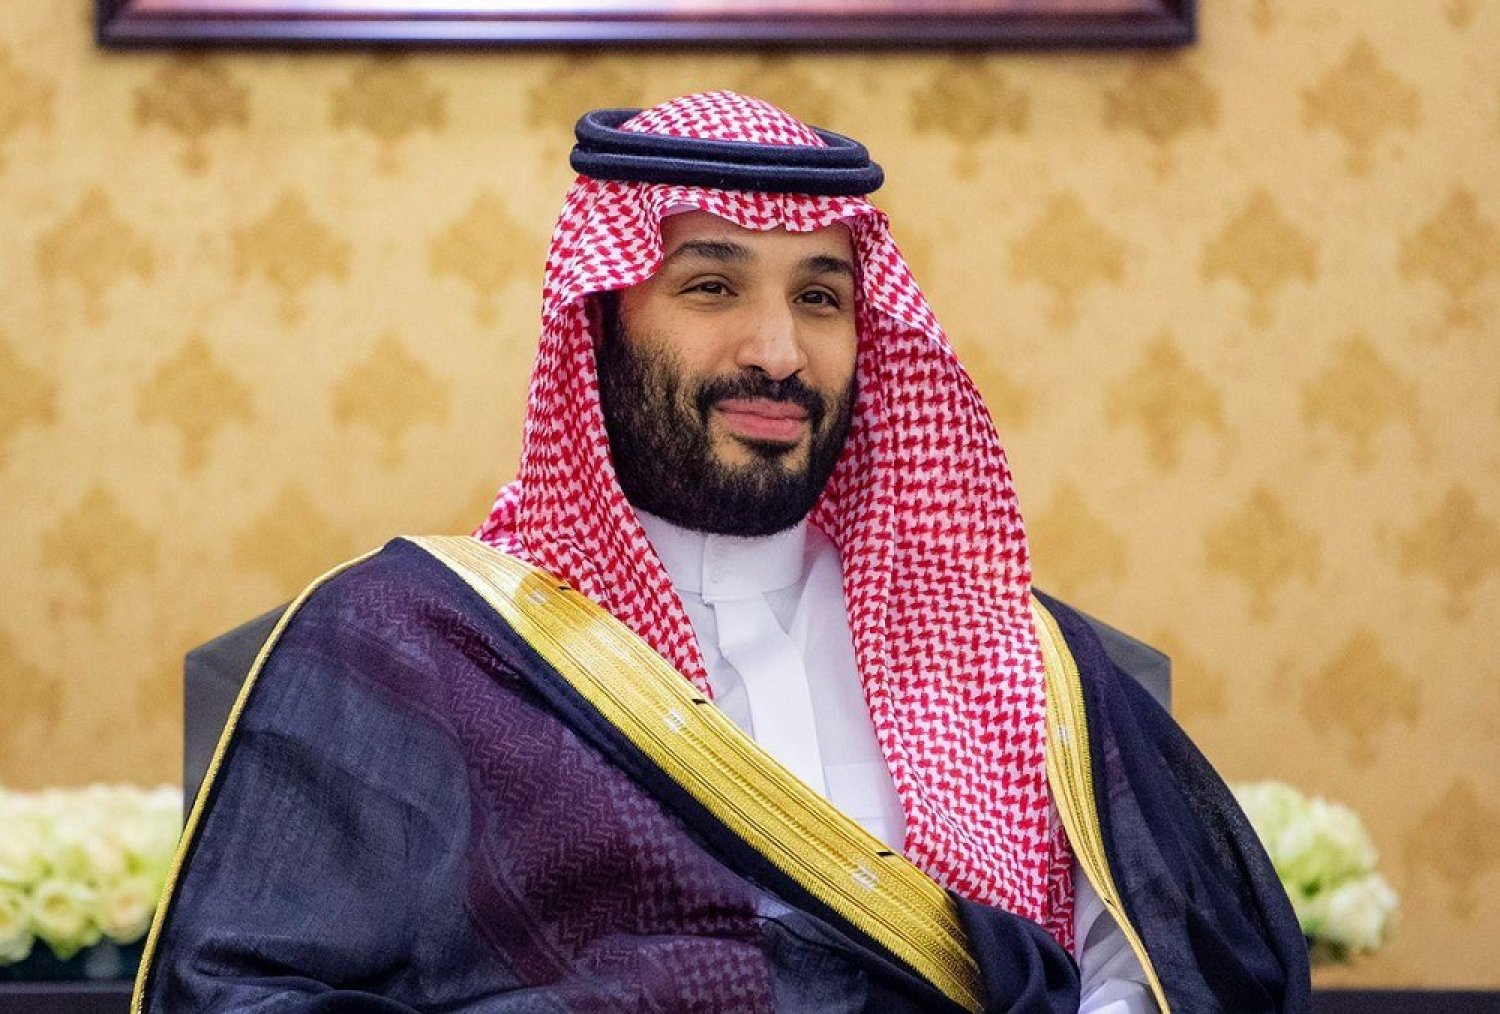 14-intriguing-facts-about-mohammed-bin-salman